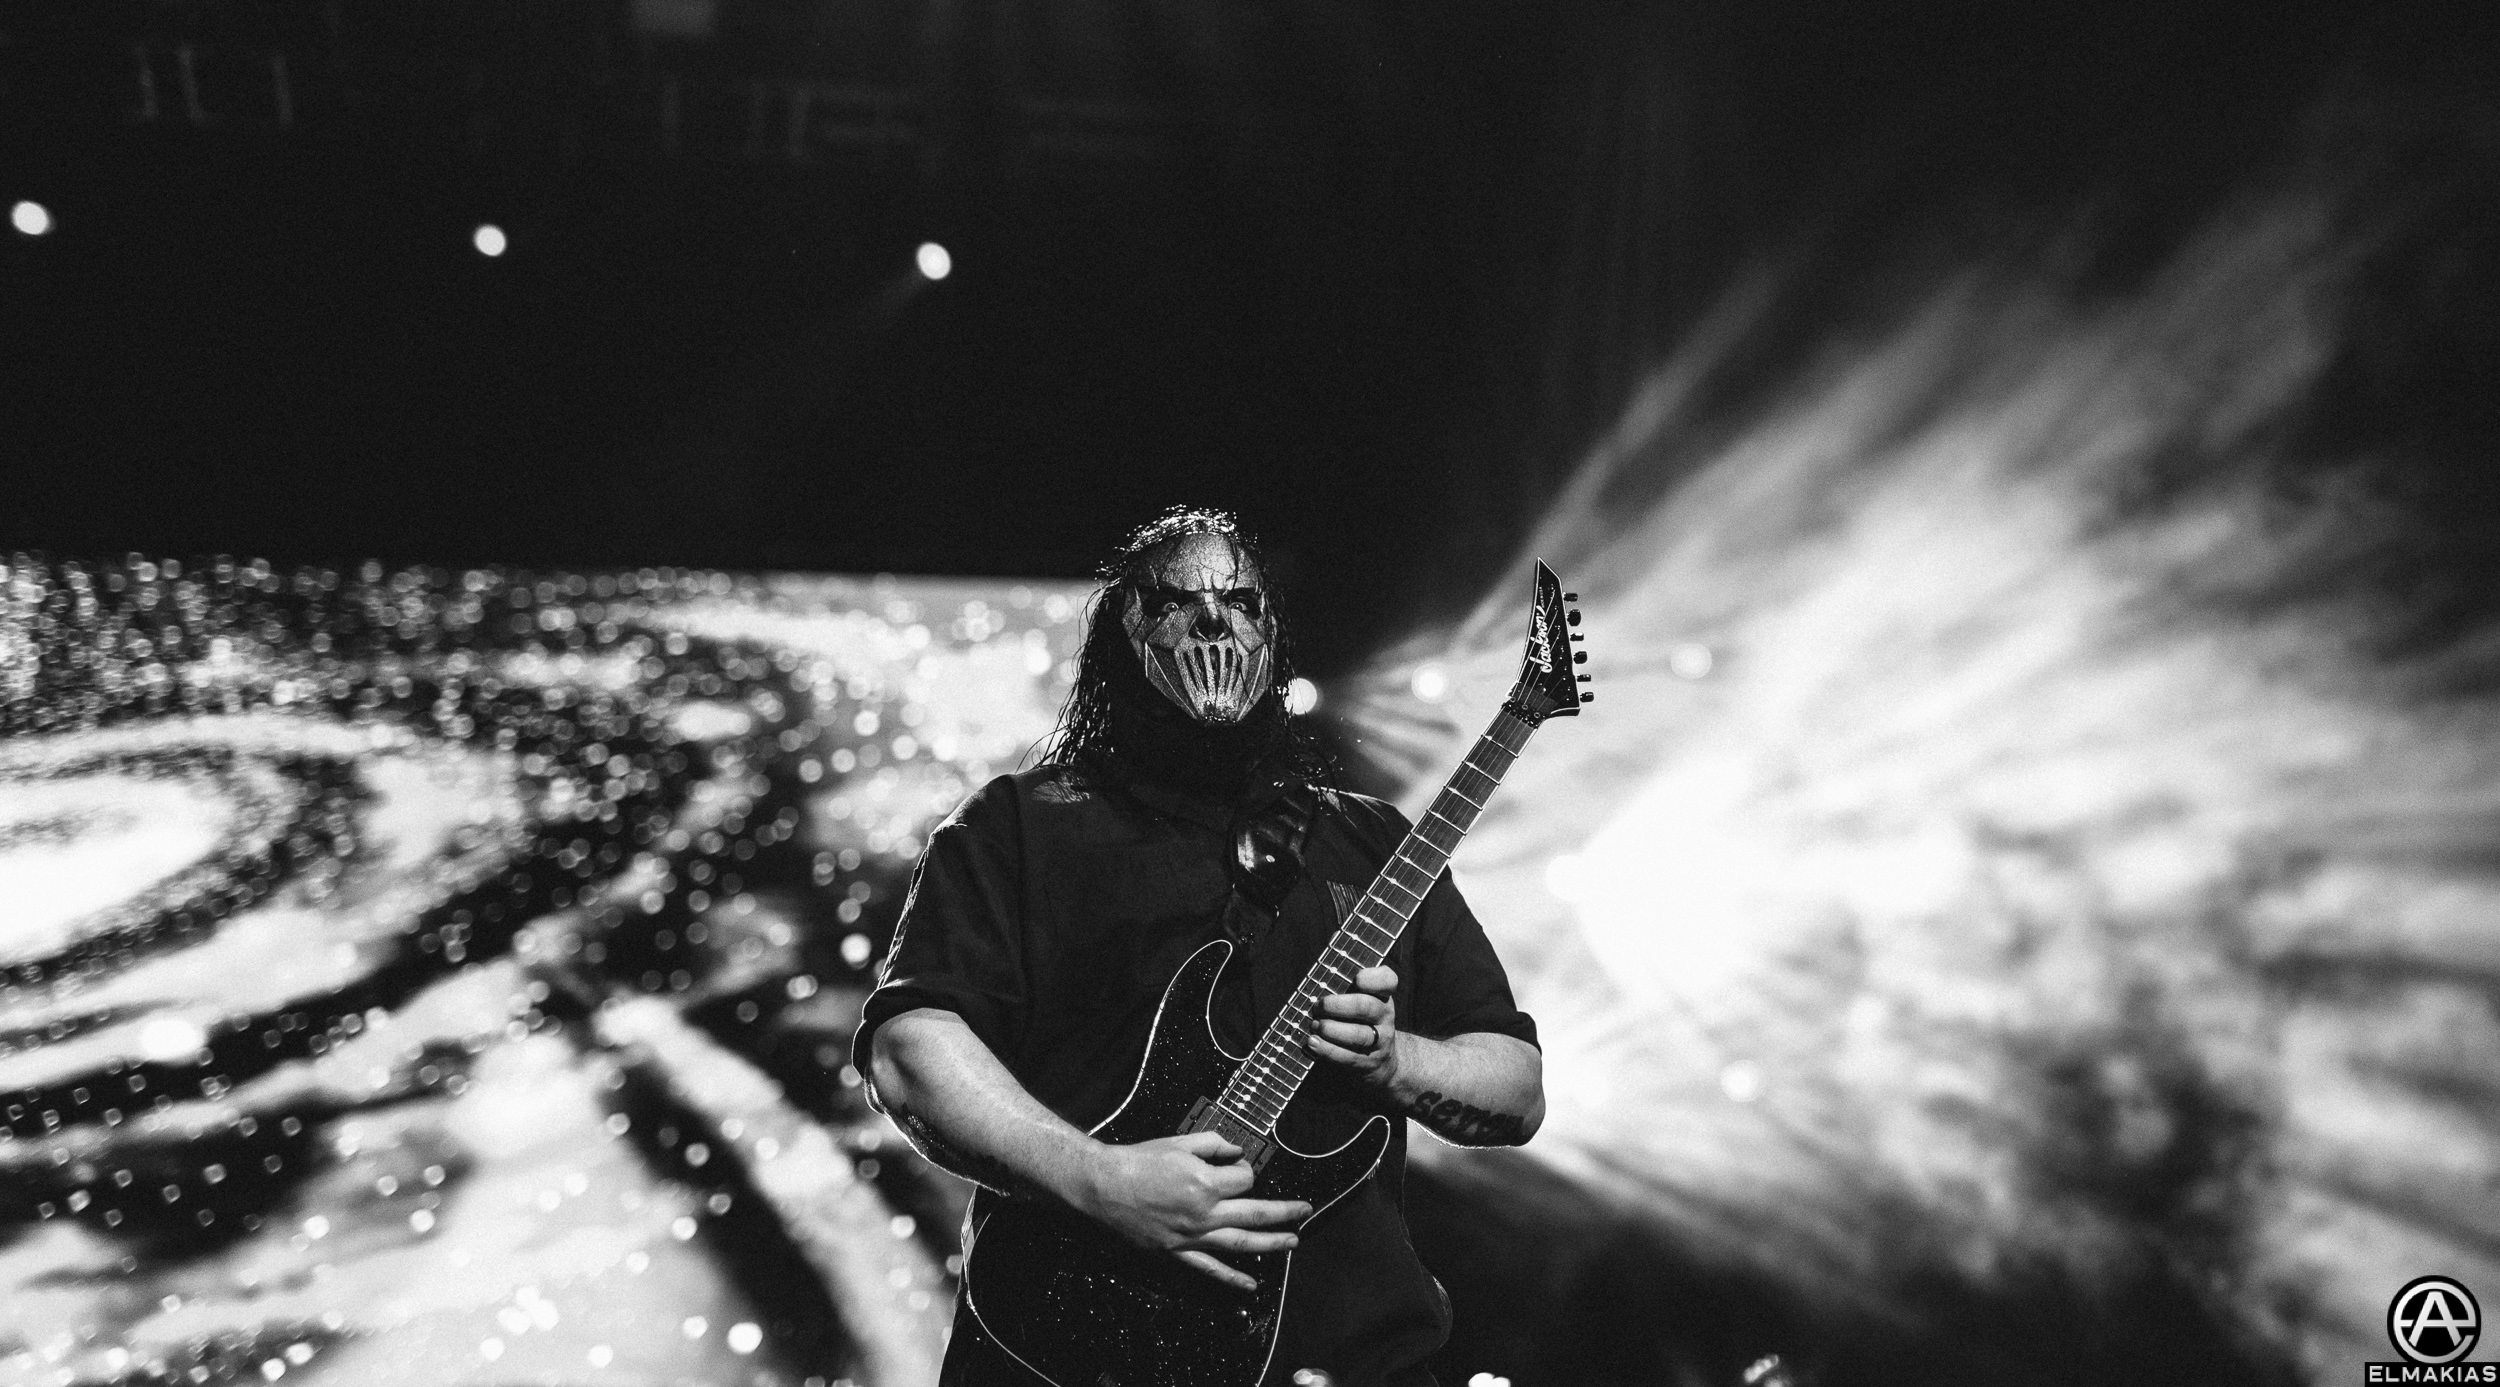 Mick Thomson of Slipknot photographed with the Sigma 50mm ART f/1.4